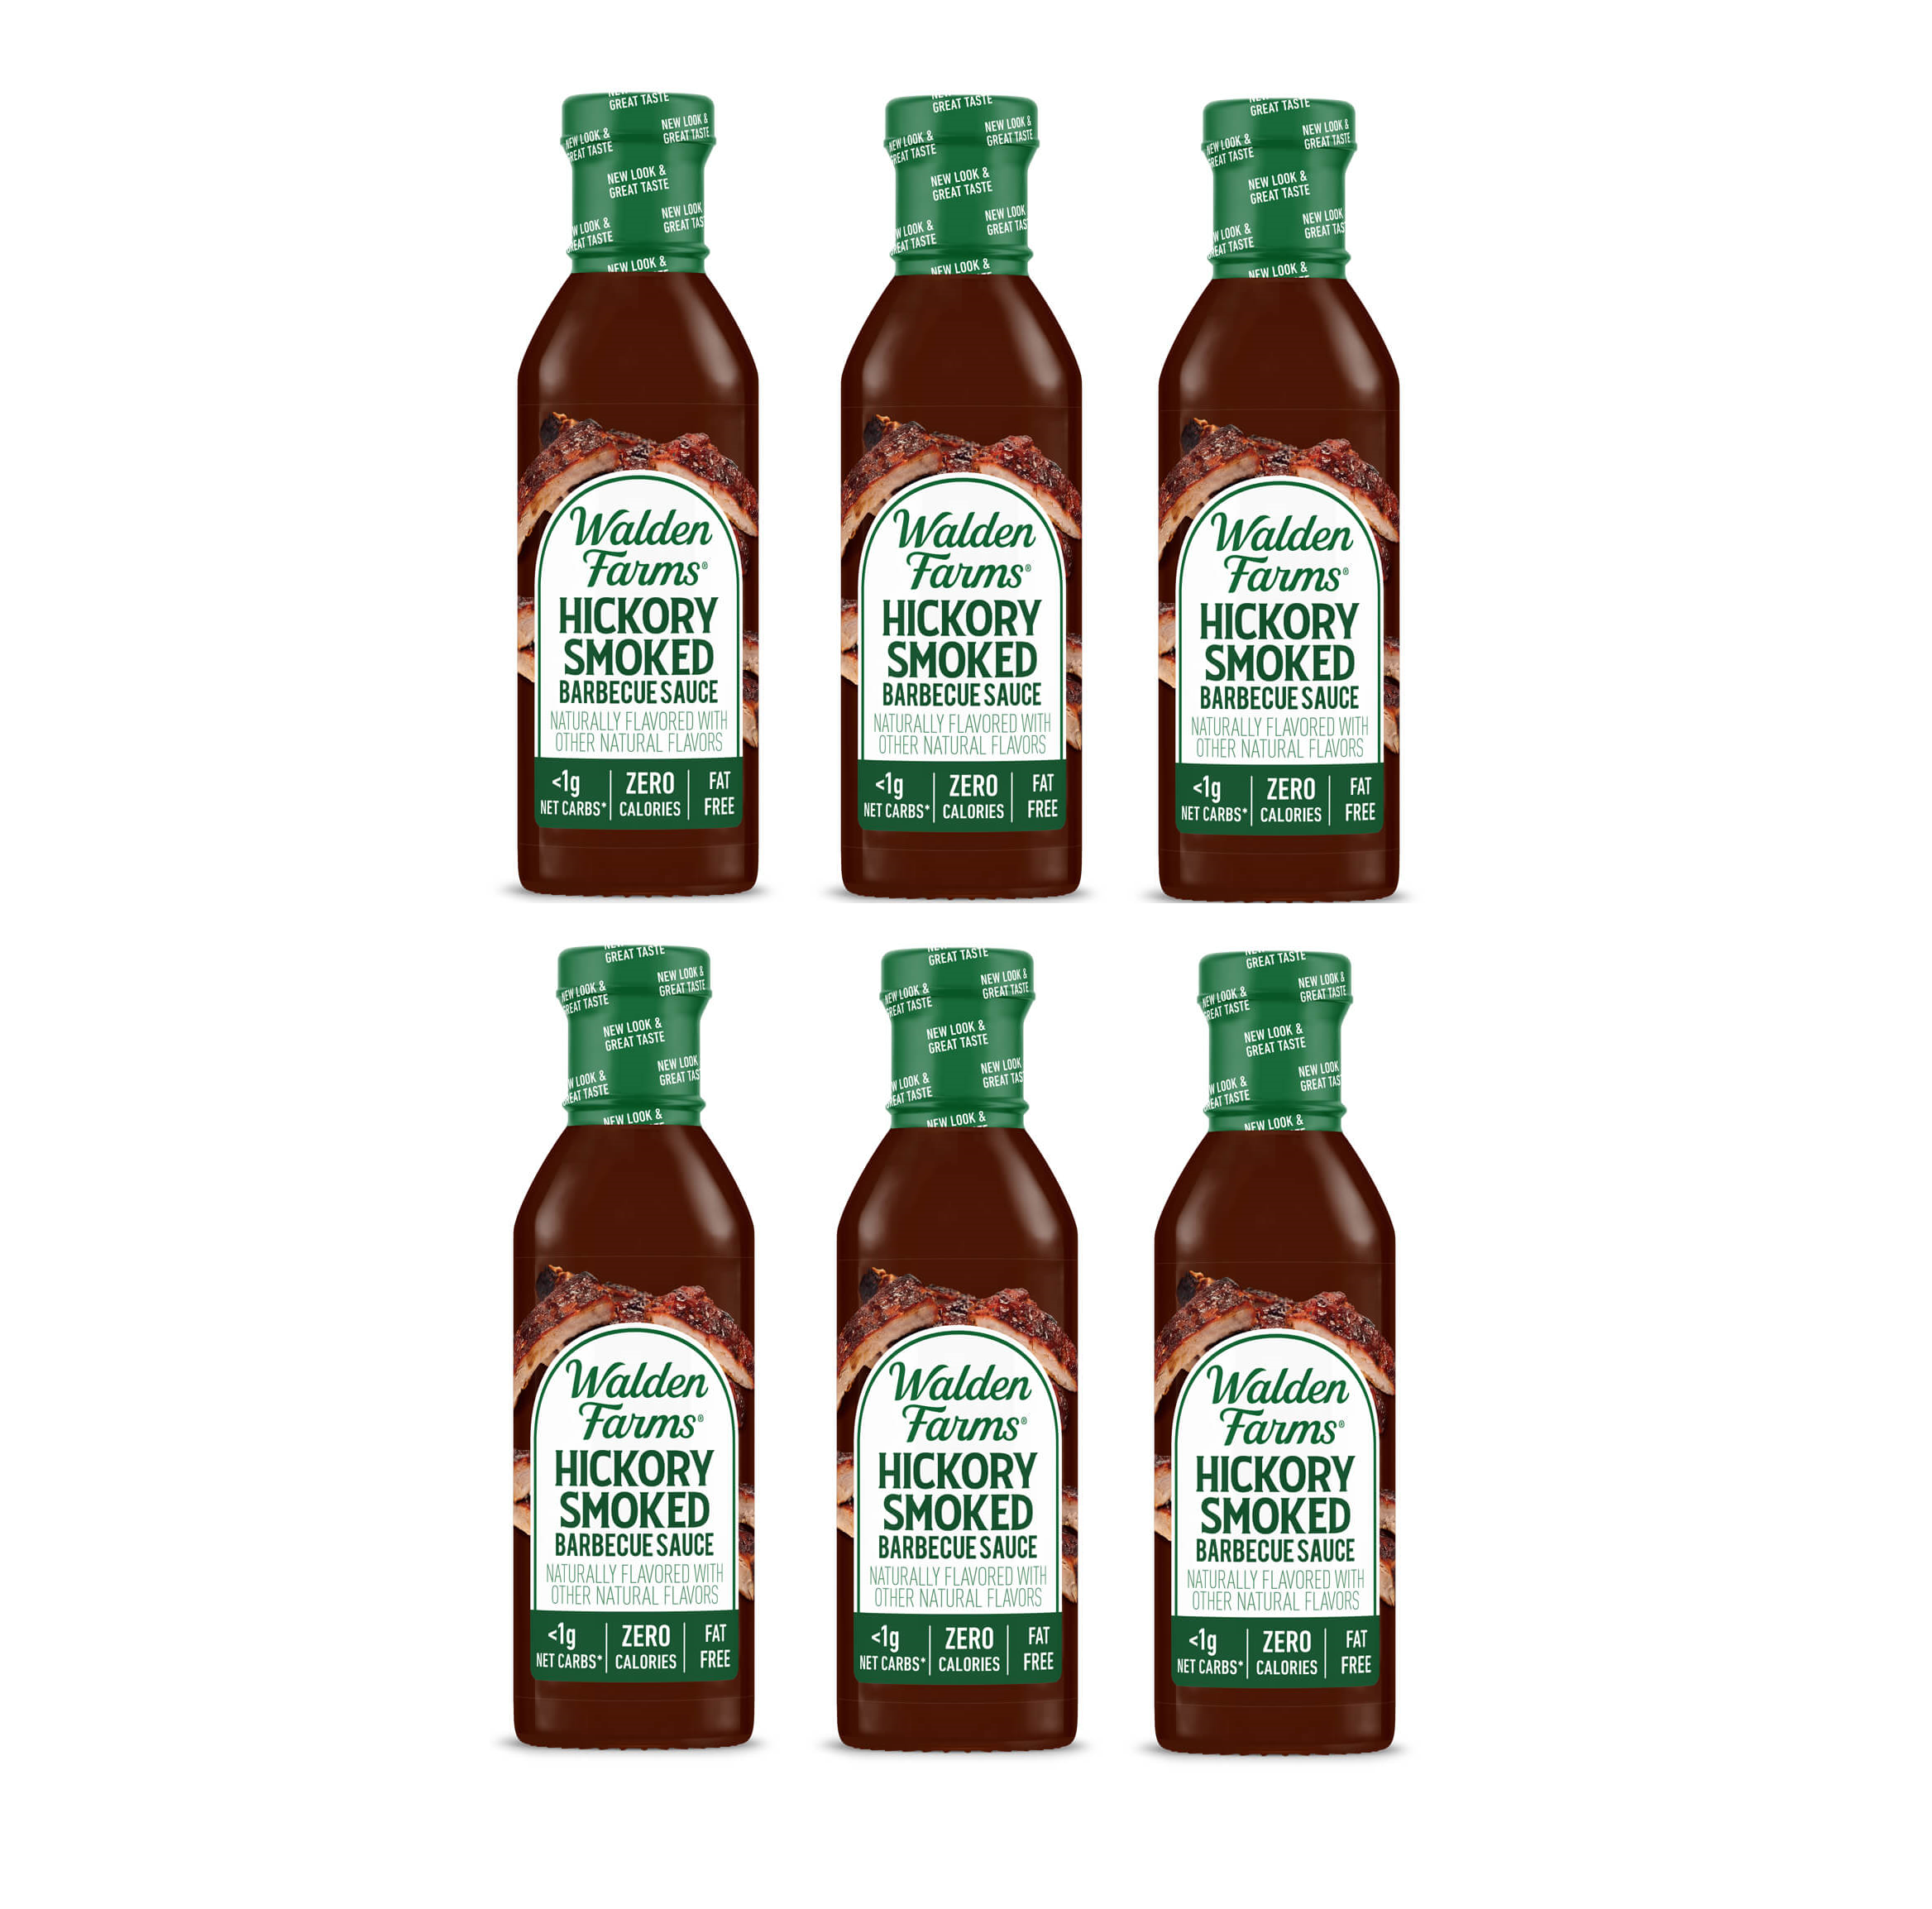 #Flavor_Hickory Smoked #Size_6 Bottles